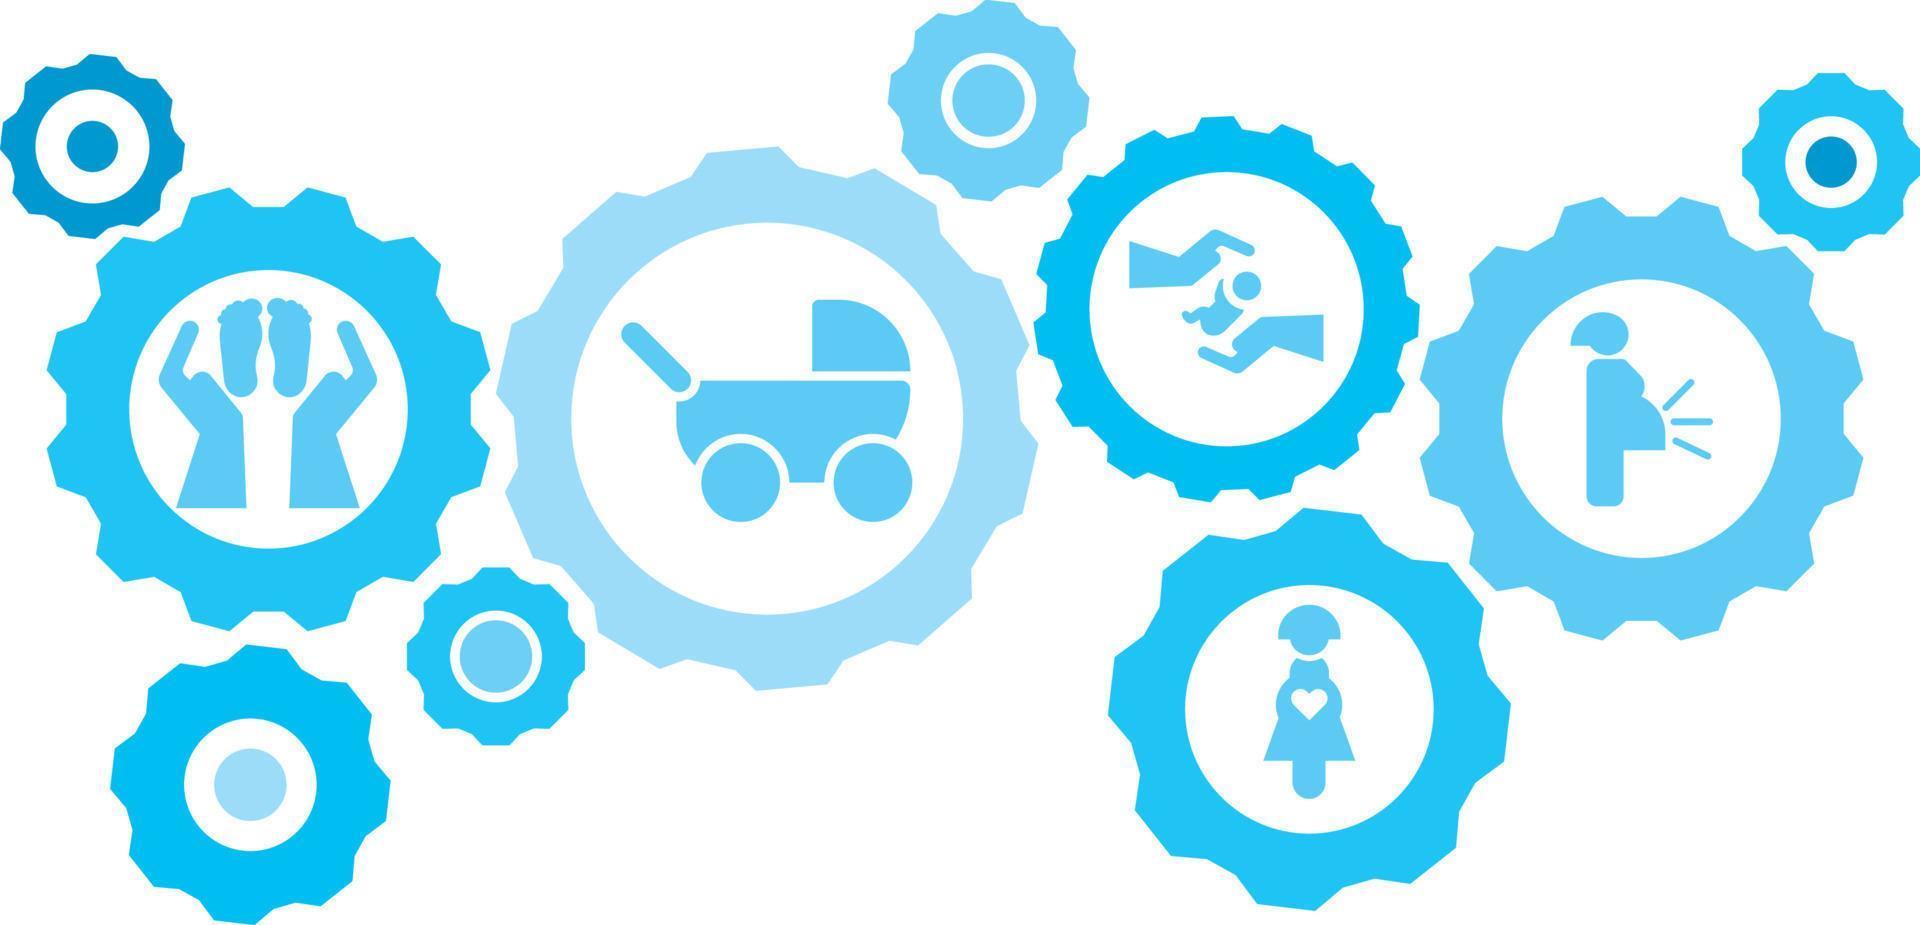 Connected gears and vector icons for logistic, service, shipping, distribution, transport, market, communicate concepts. Pregnant, woman, baby gear blue icon set .